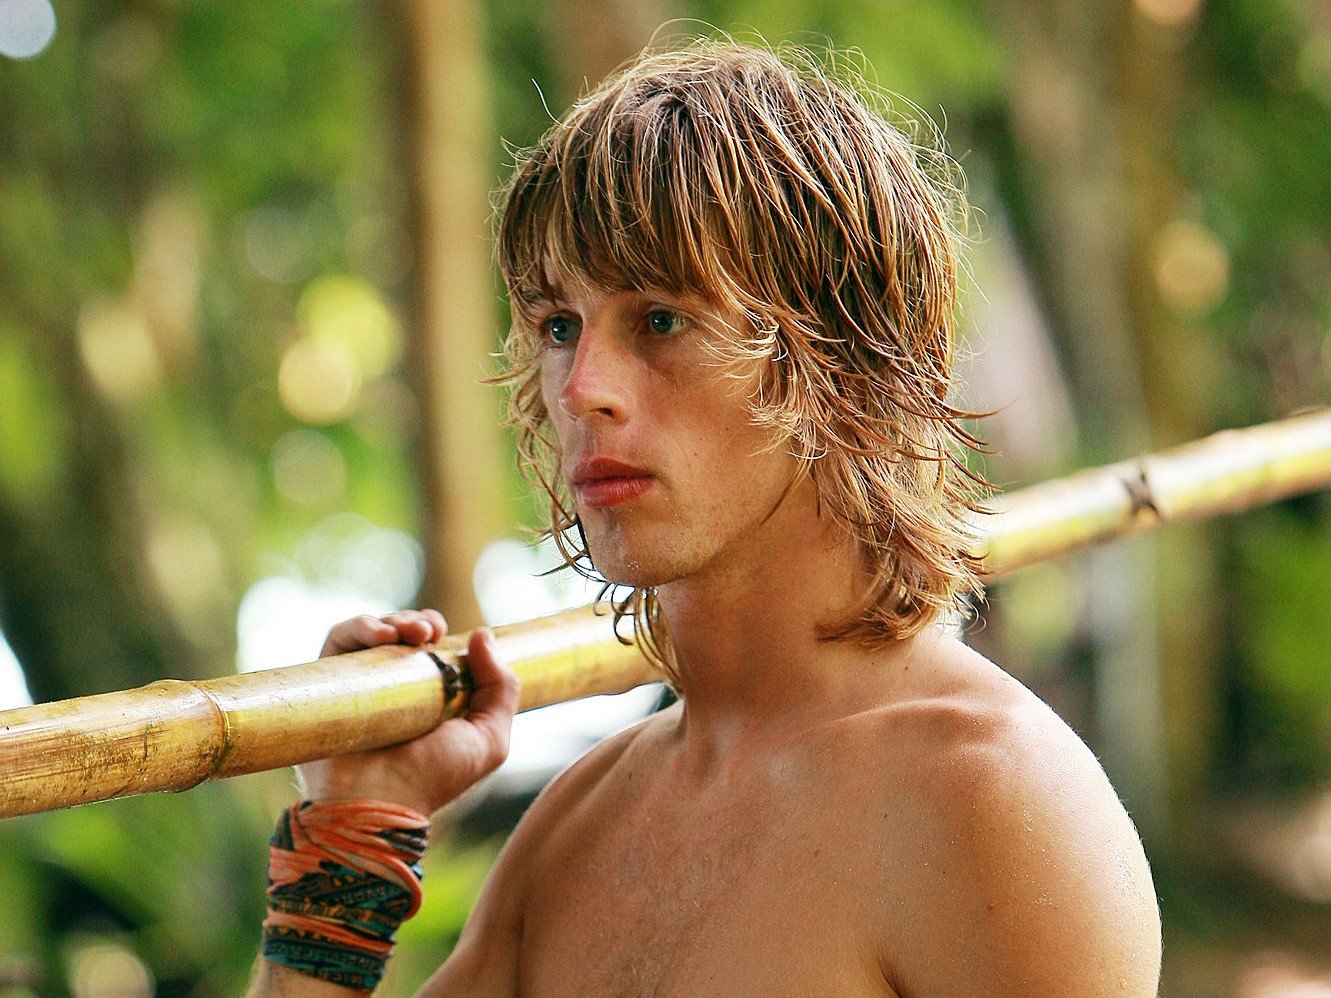 'Survivor: Micronesia' star Erik Reichenbach wears his tribe buff around his wrist and carries a stick of bamboo.